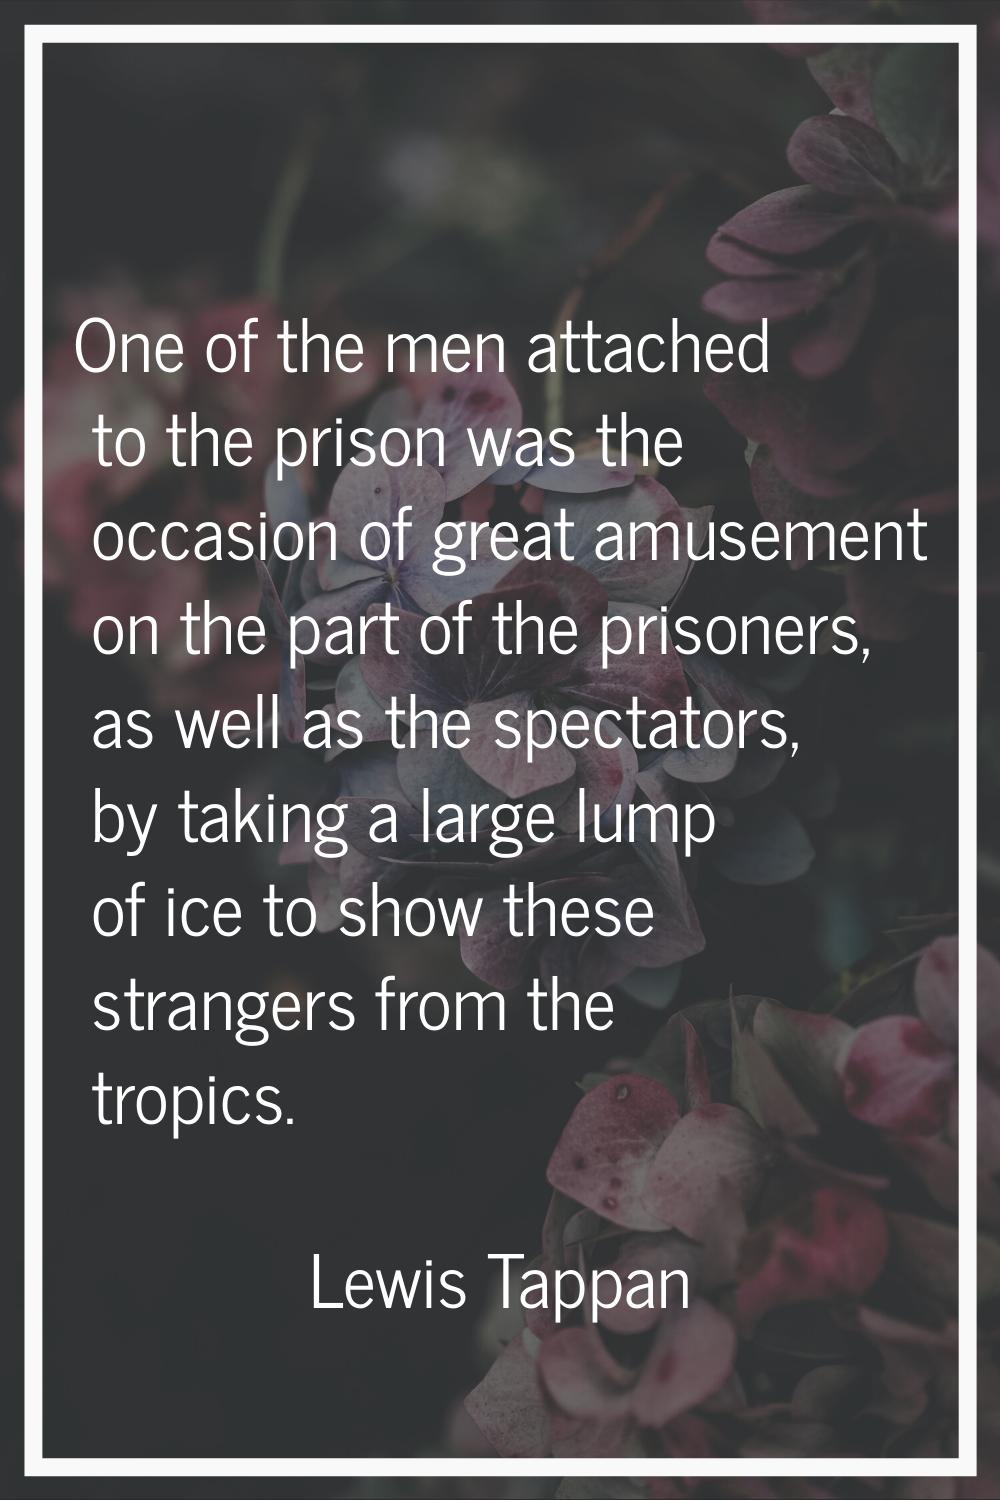 One of the men attached to the prison was the occasion of great amusement on the part of the prison